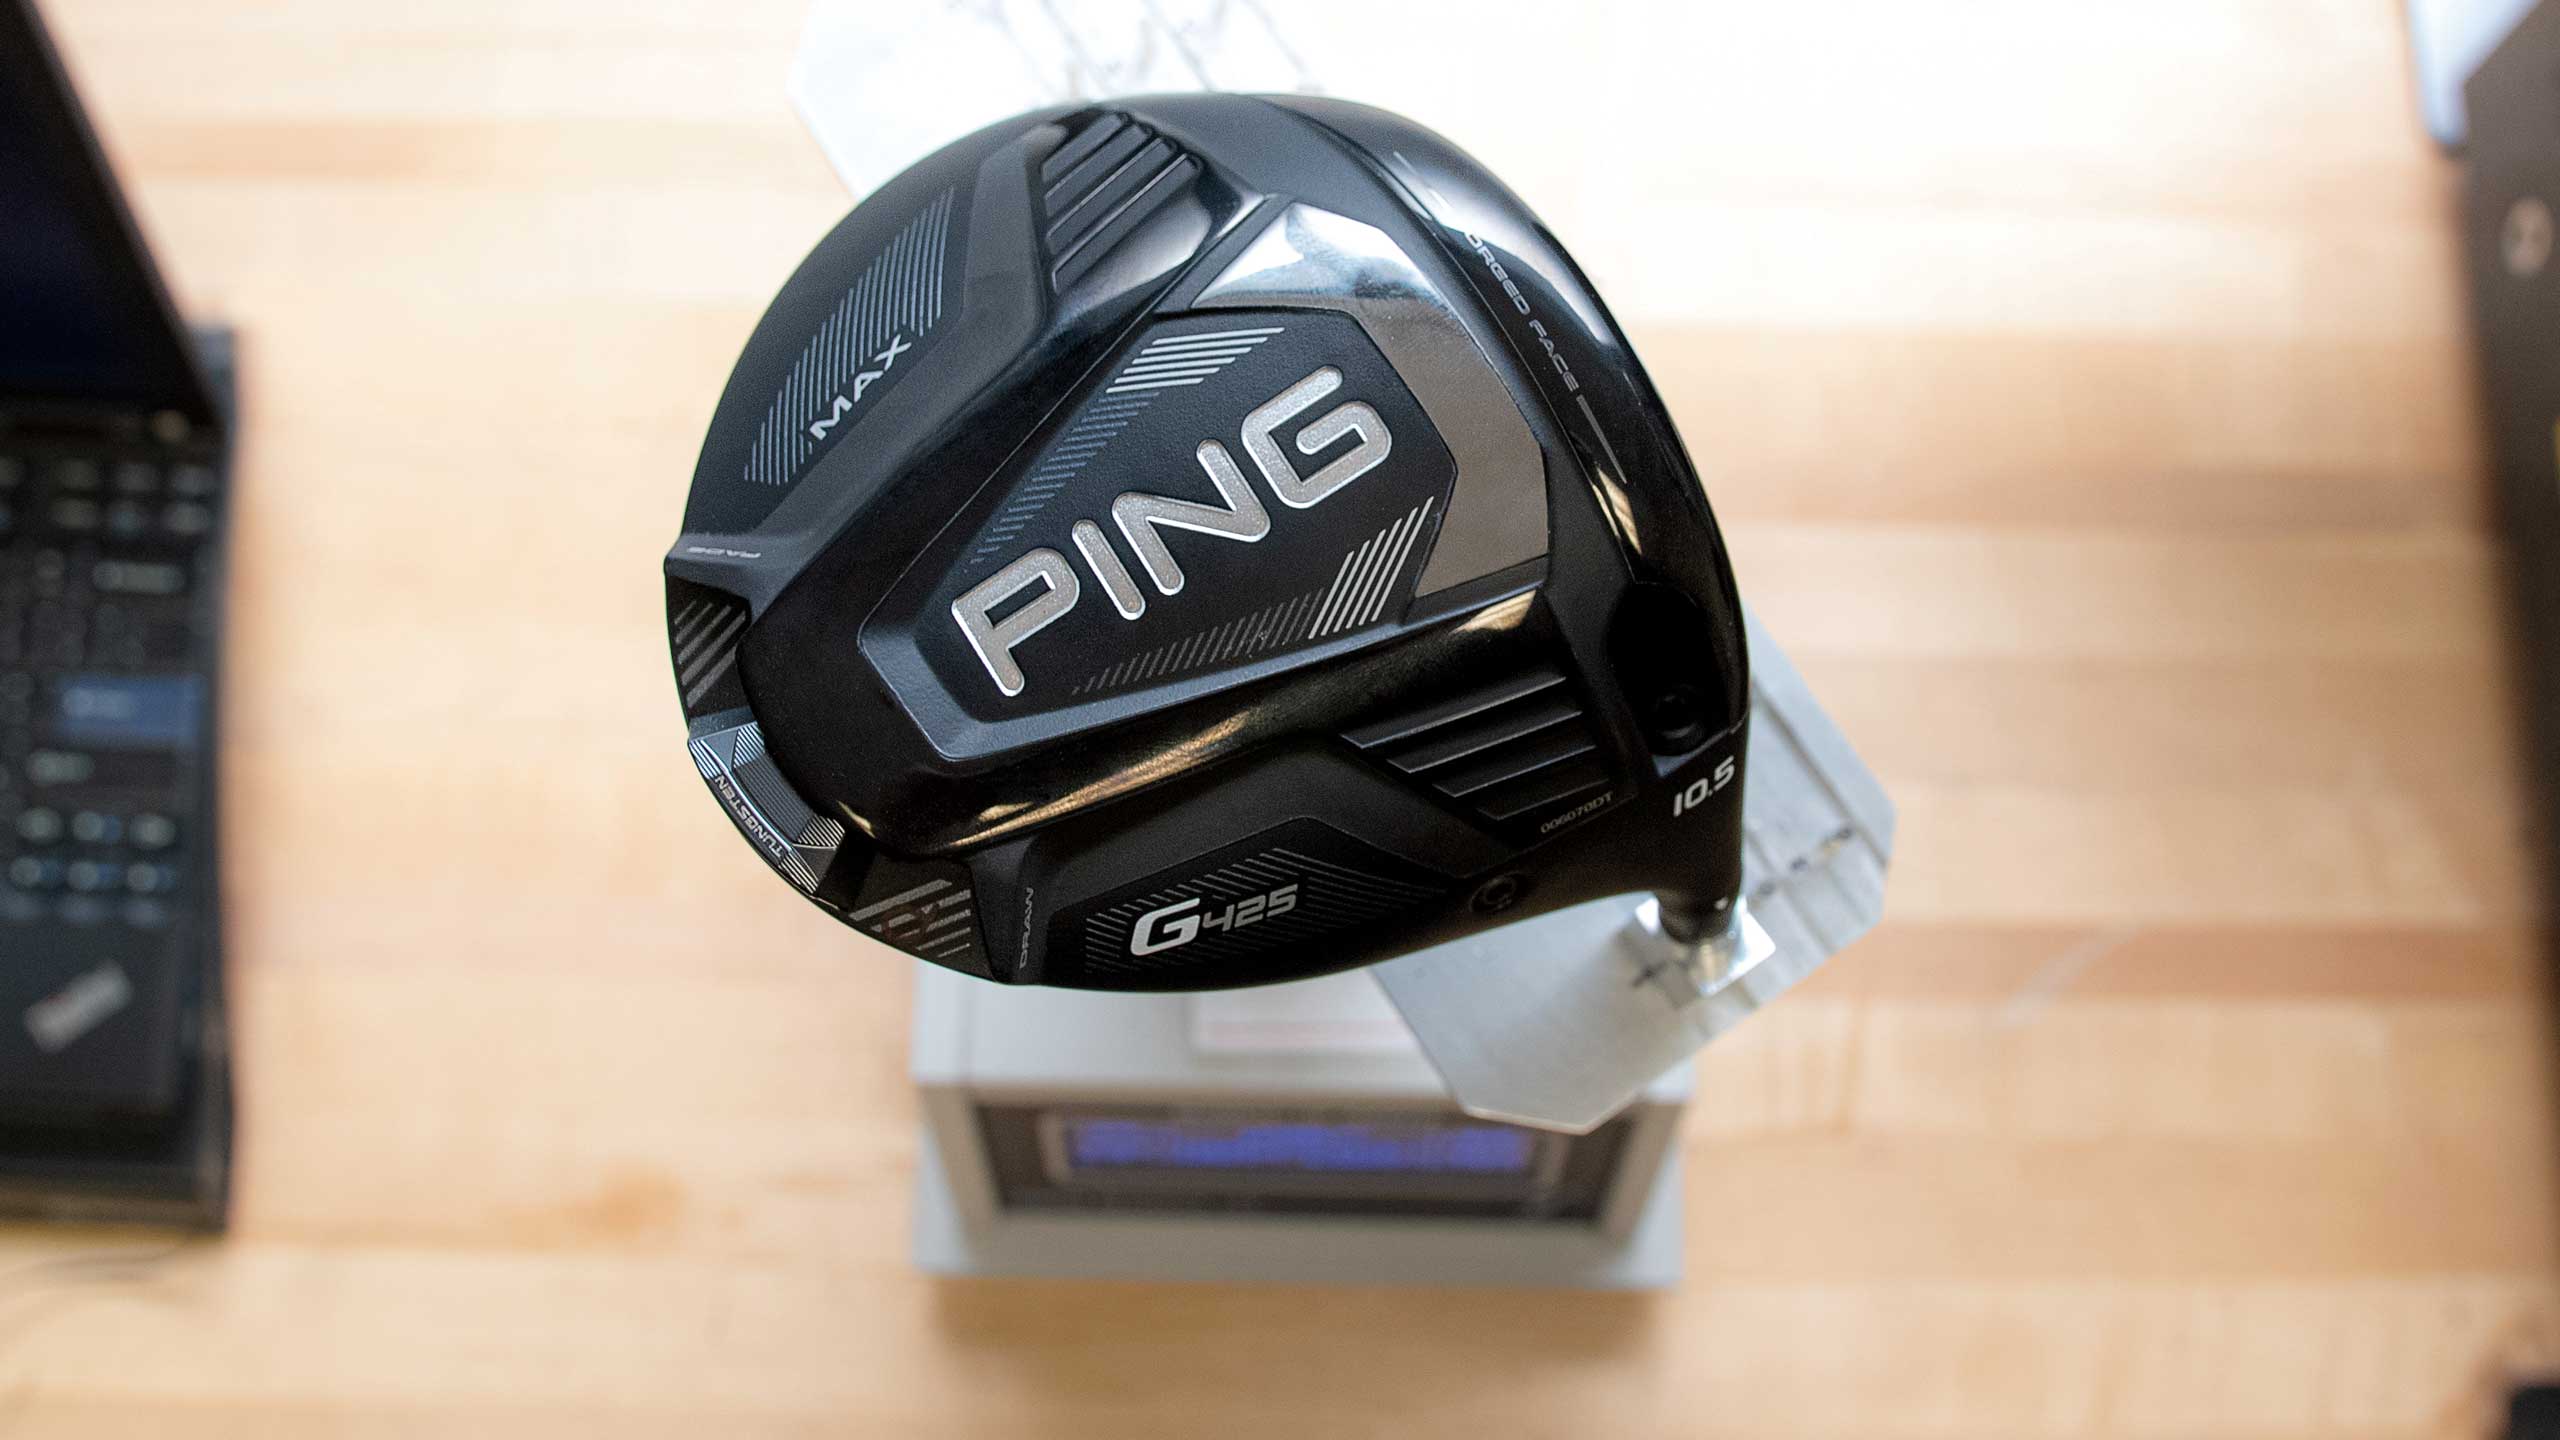 Ping lets science take the lead with new G425 family of clubs